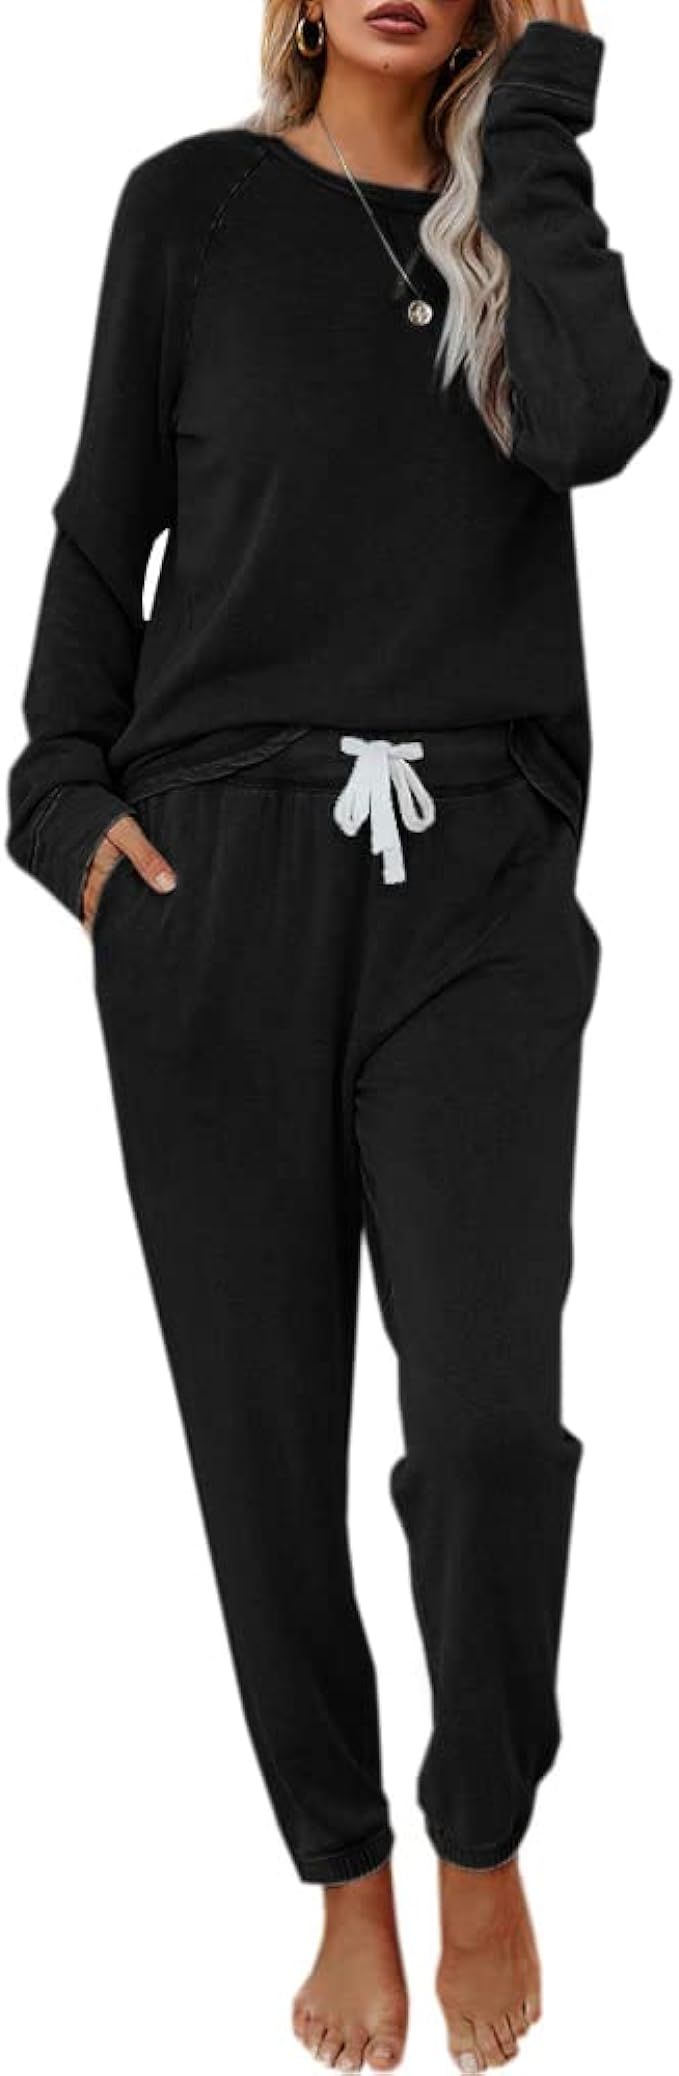 Eurivicy Women's Solid Sweatsuit Set 2 Piece Long Sleeve Pullover and Drawstring Sweatpants Sport... | Amazon (US)